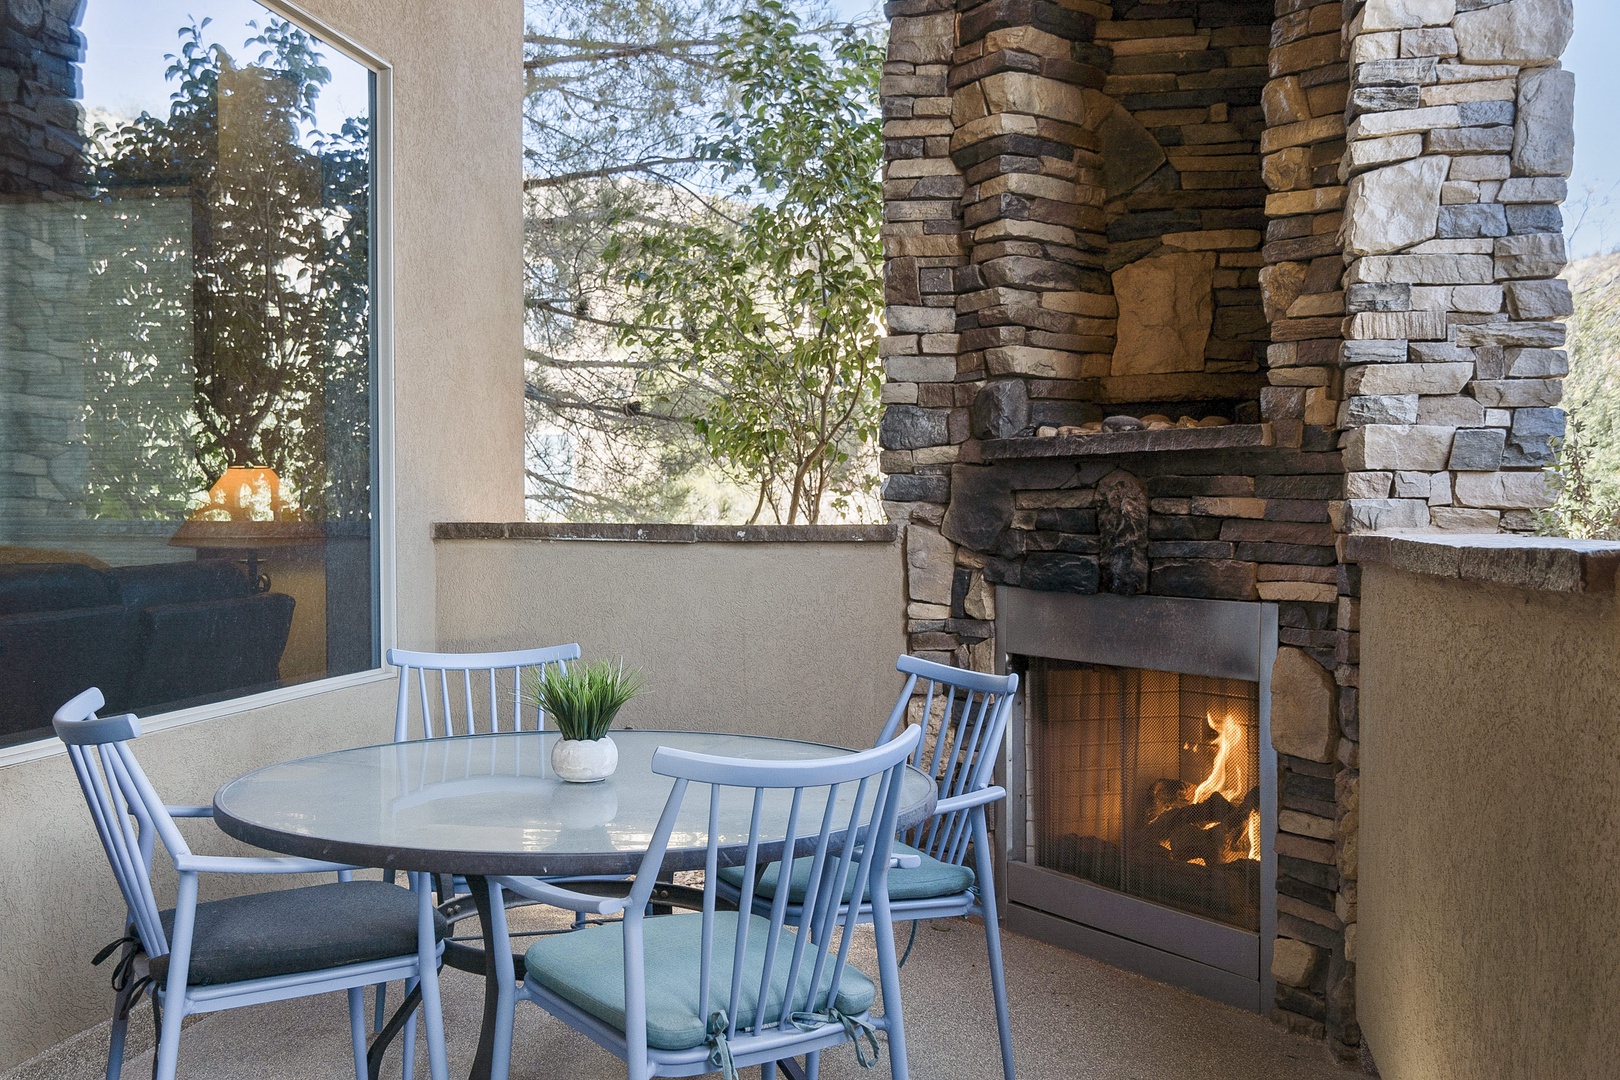 Balcony with outdoor dining and fireplace